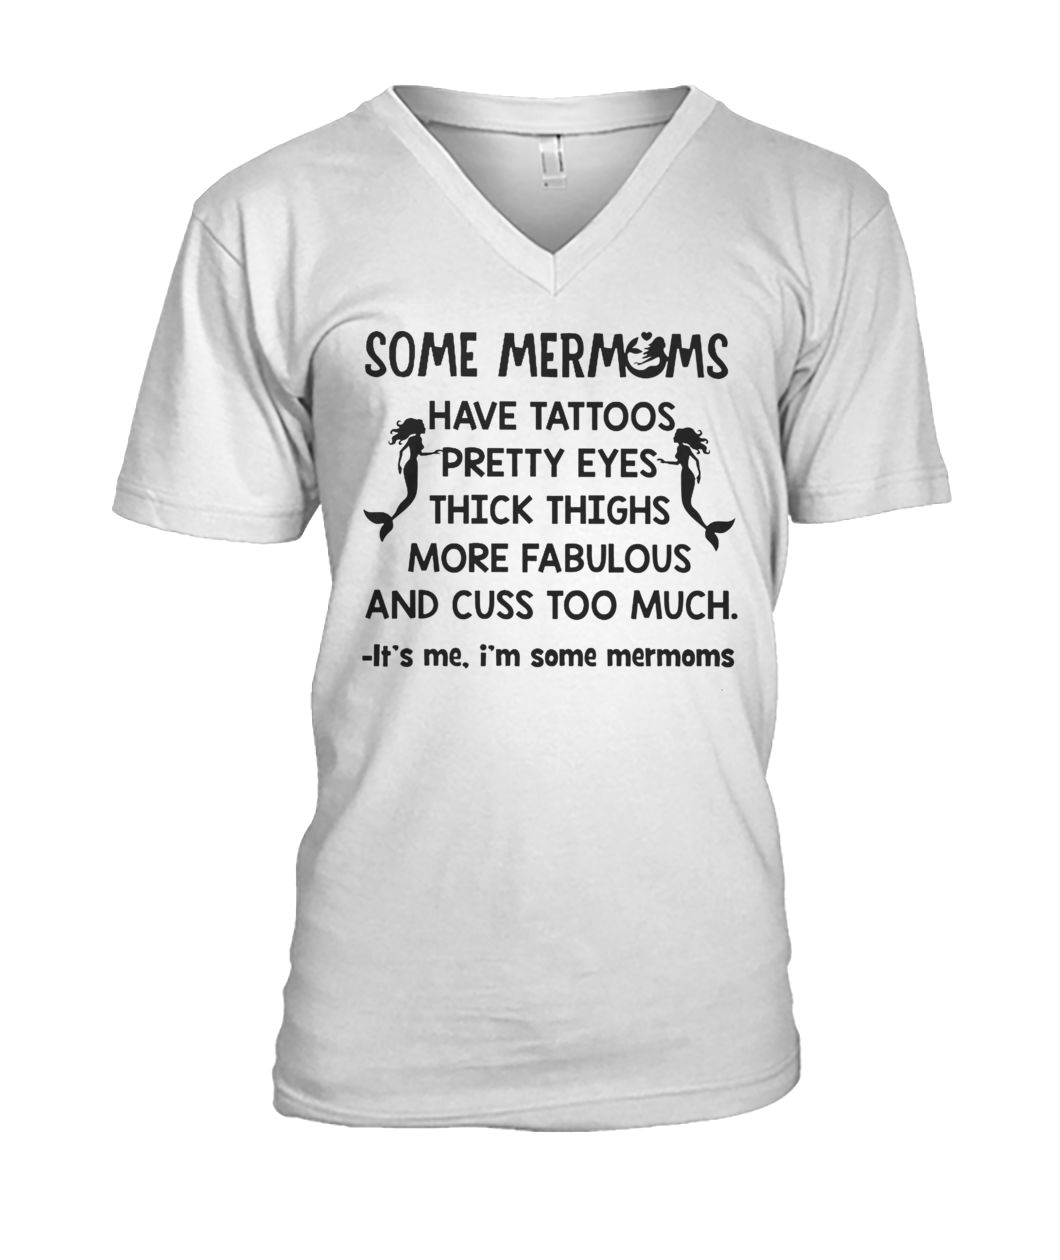 Some mermoms have tattoos pretty eyes thick thights more fabulous and cuss too much mens v-neck